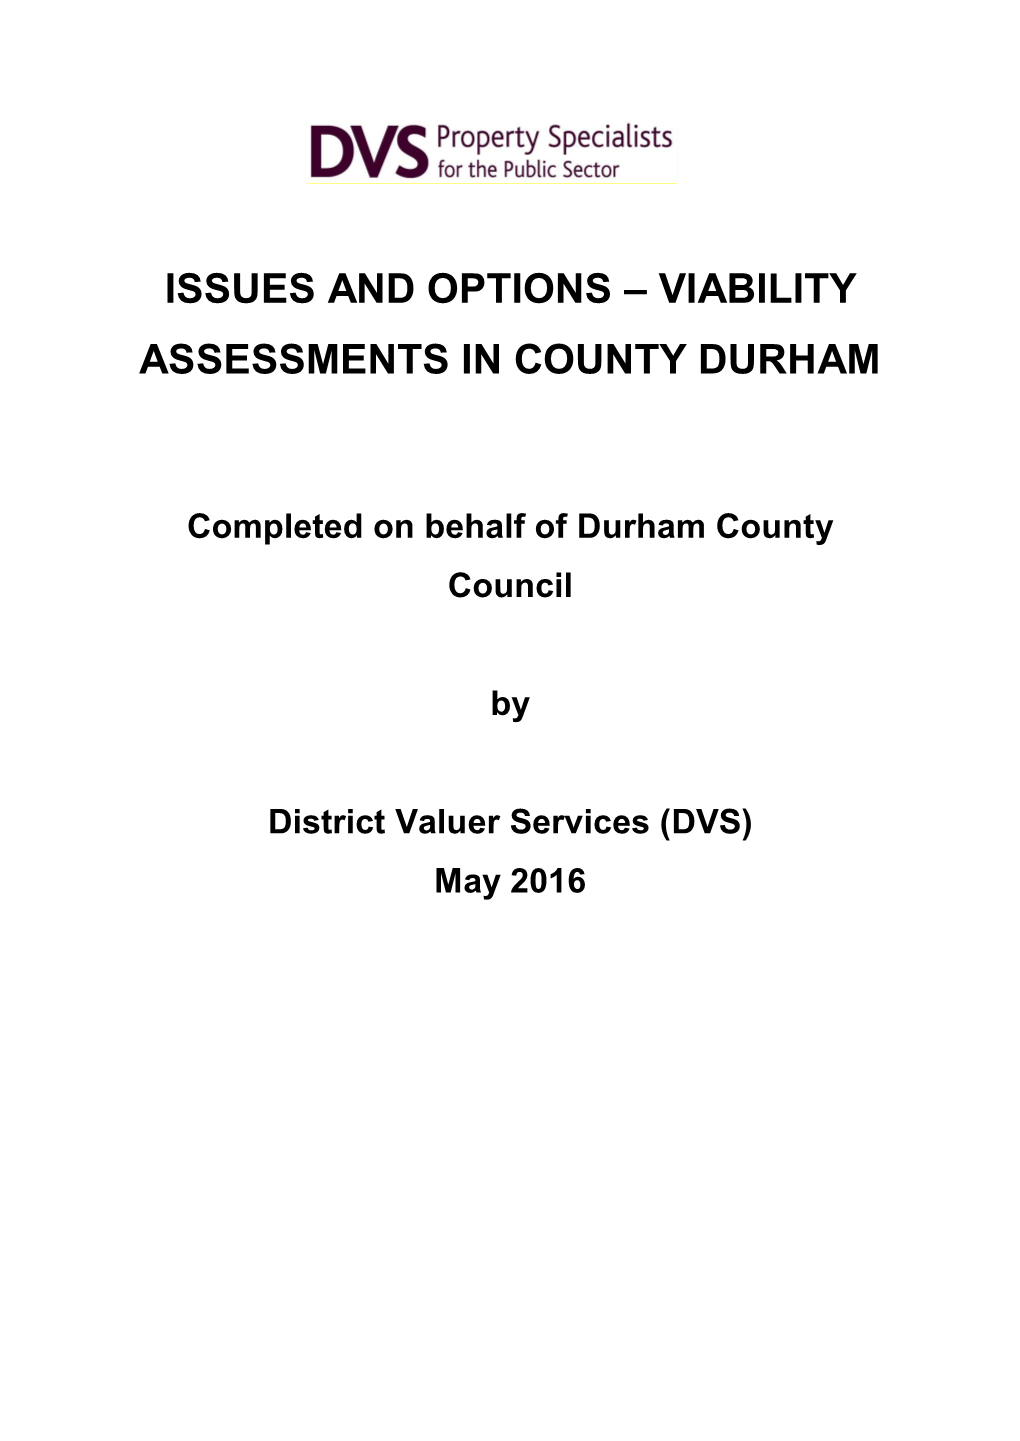 Issues and Options – Viability Assessments in County Durham